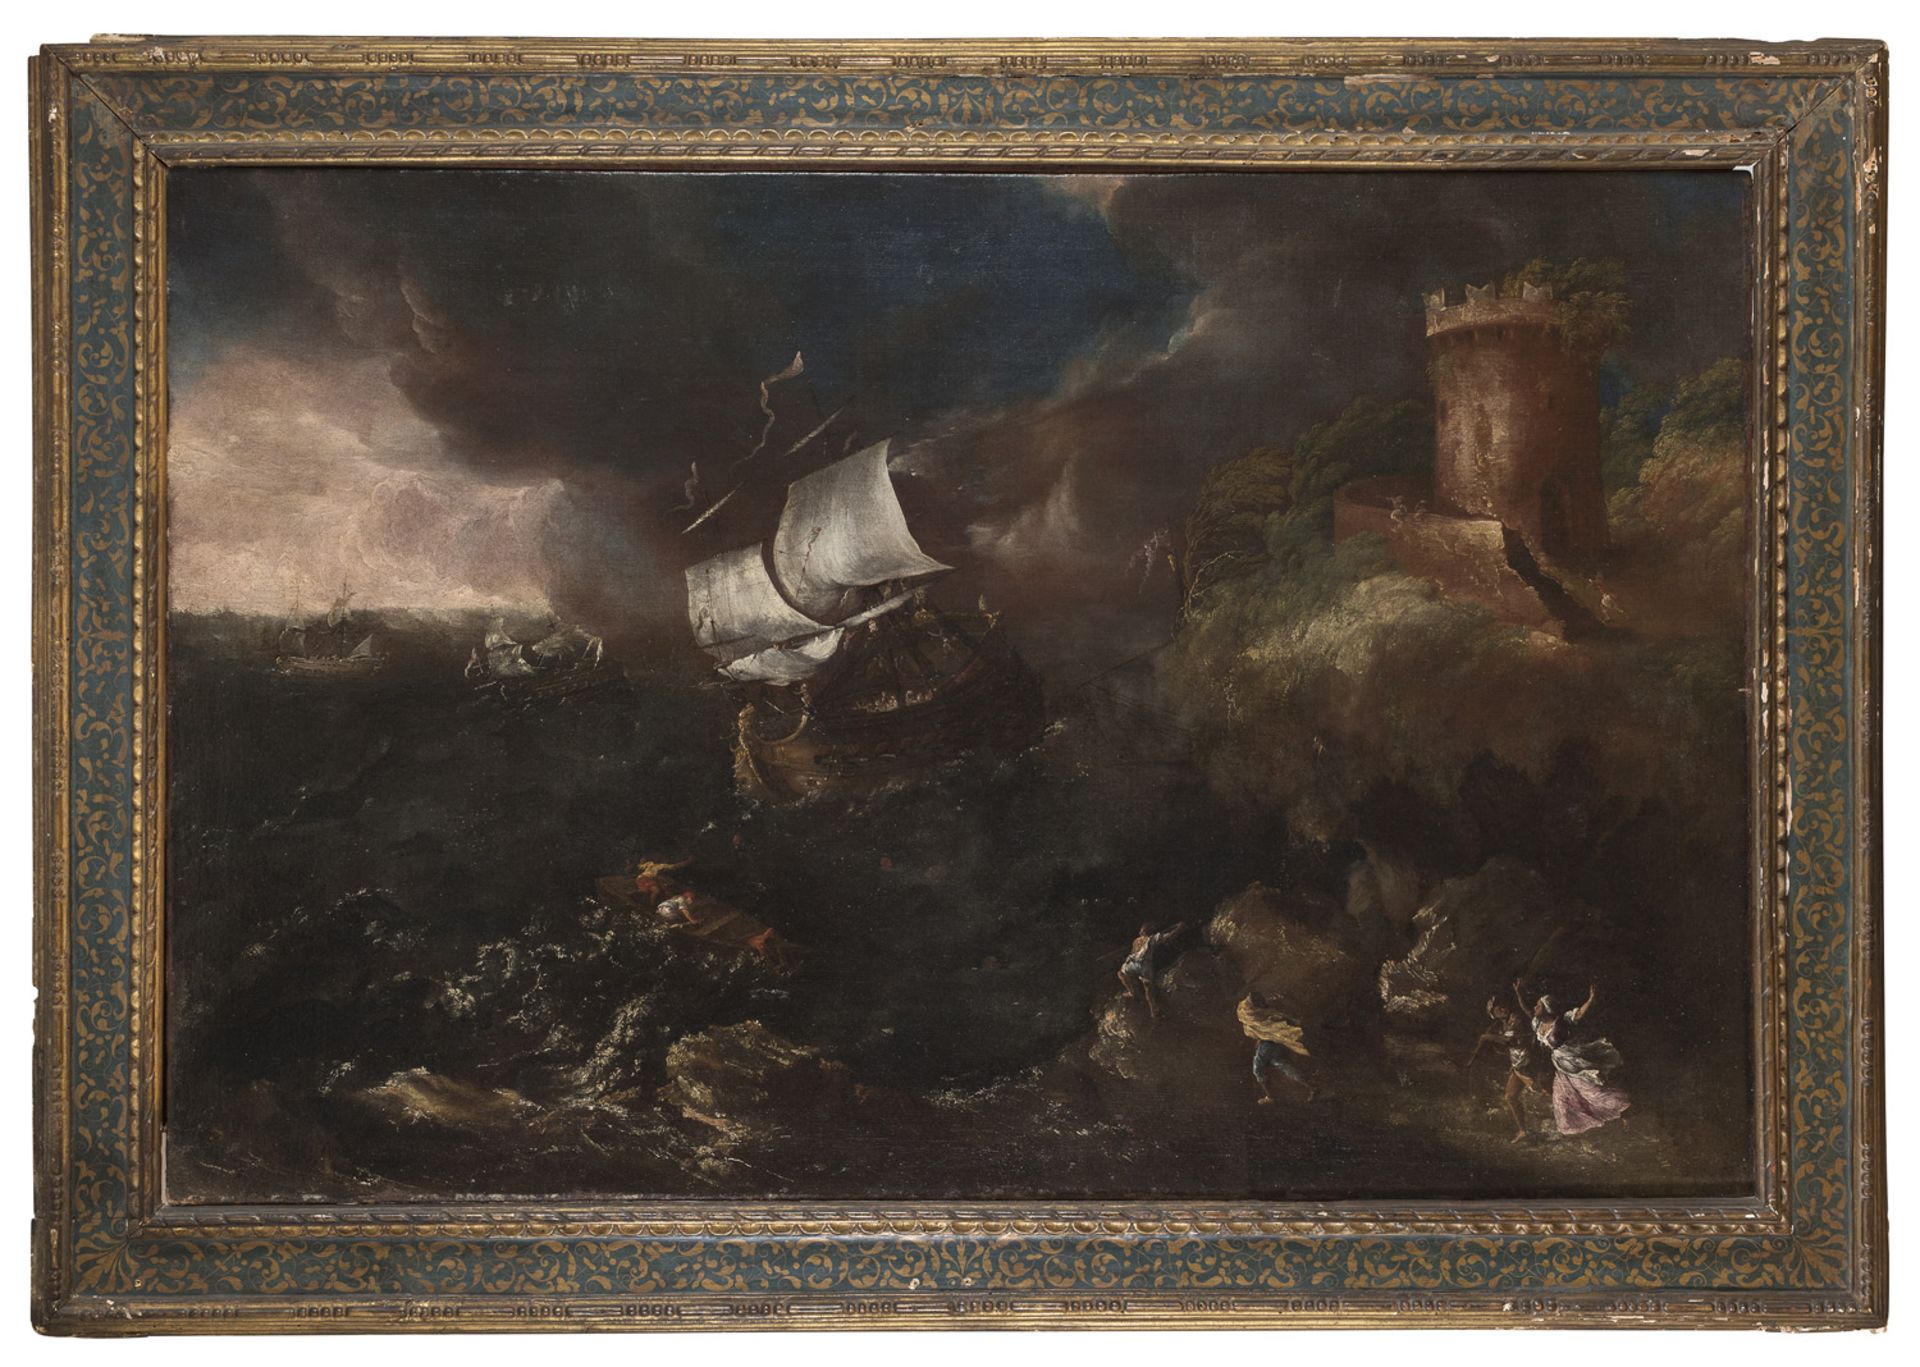 DUTCH OIL PAINTING OF A STORMY SEA. EARLY 18TH CENTURY